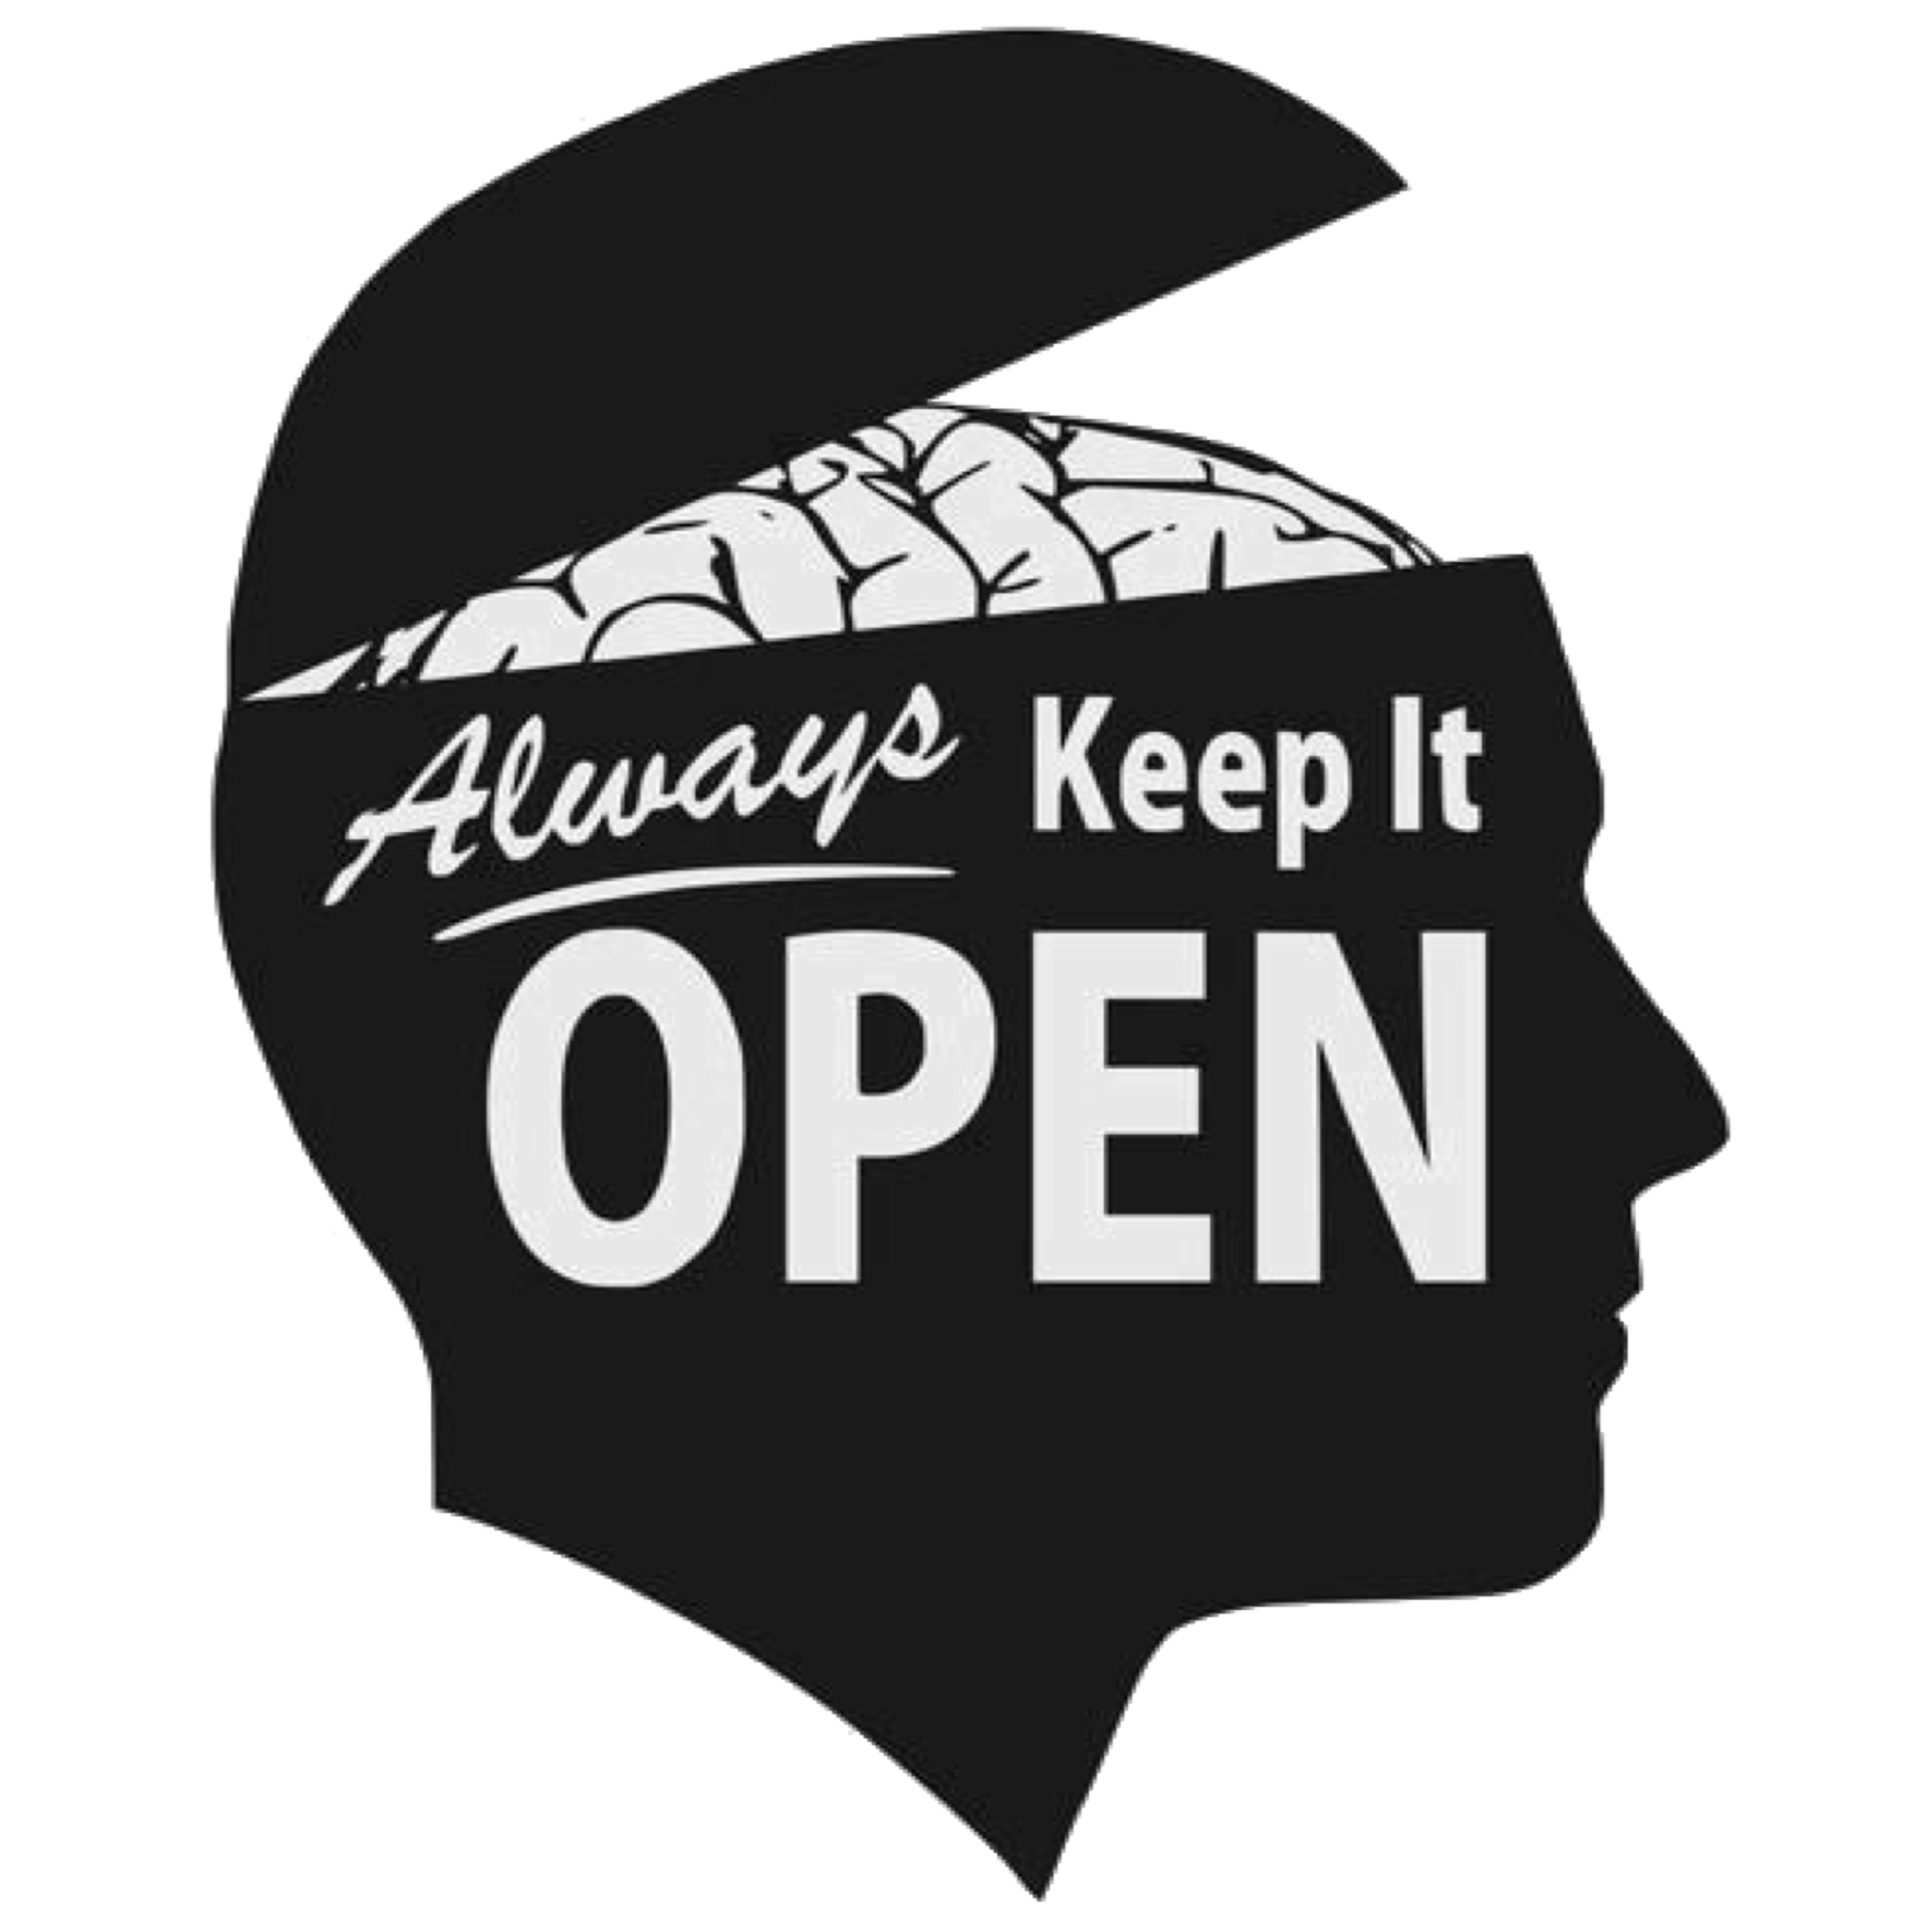 Open your mind and your trousers. Open Mind. Open minded. Keep an open Mind. Open-minded person.